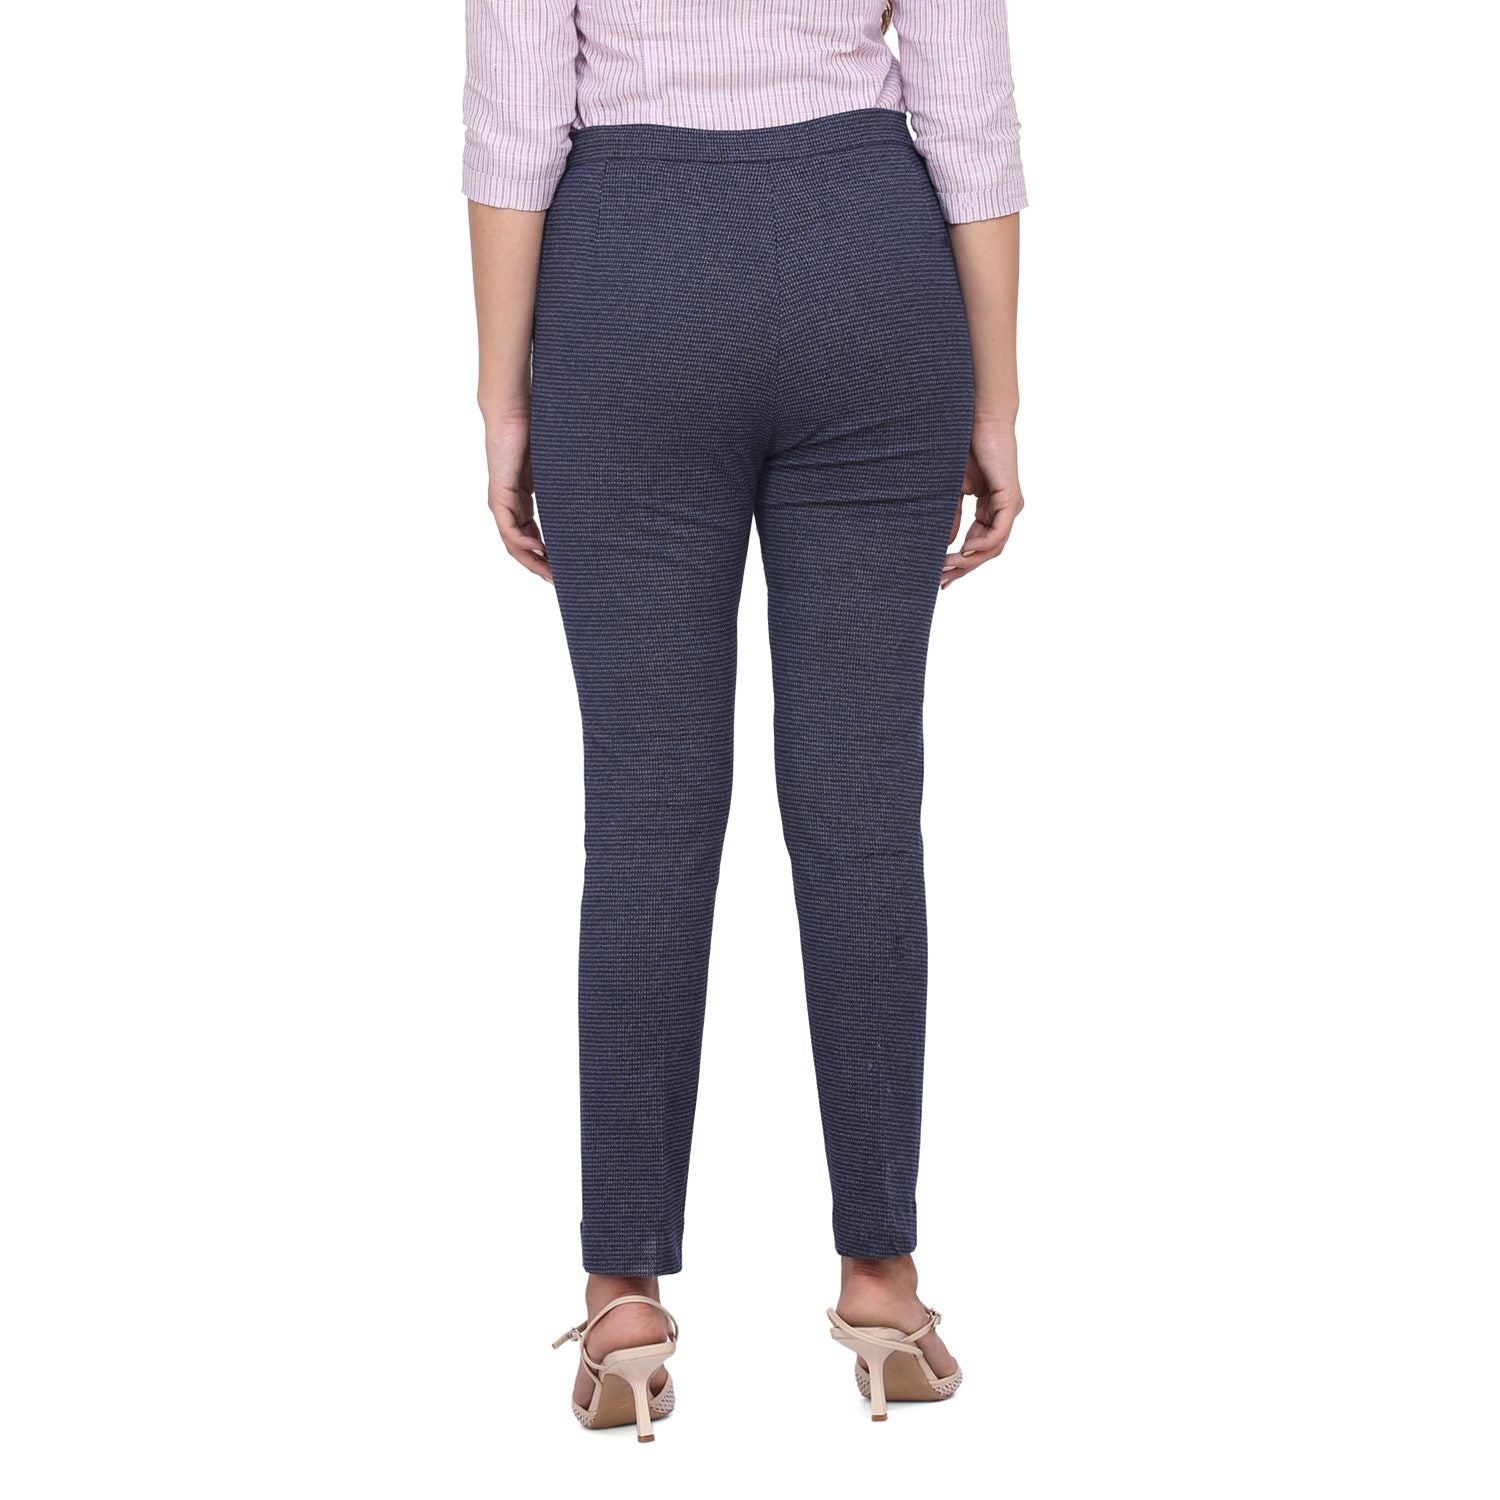 95% Cotton, 5% Spandex with Elastic closure; Pants crafted from a premium  quality fabric that will provide a soft touch against your skin. A solid  pattern with perfect fit that renders it